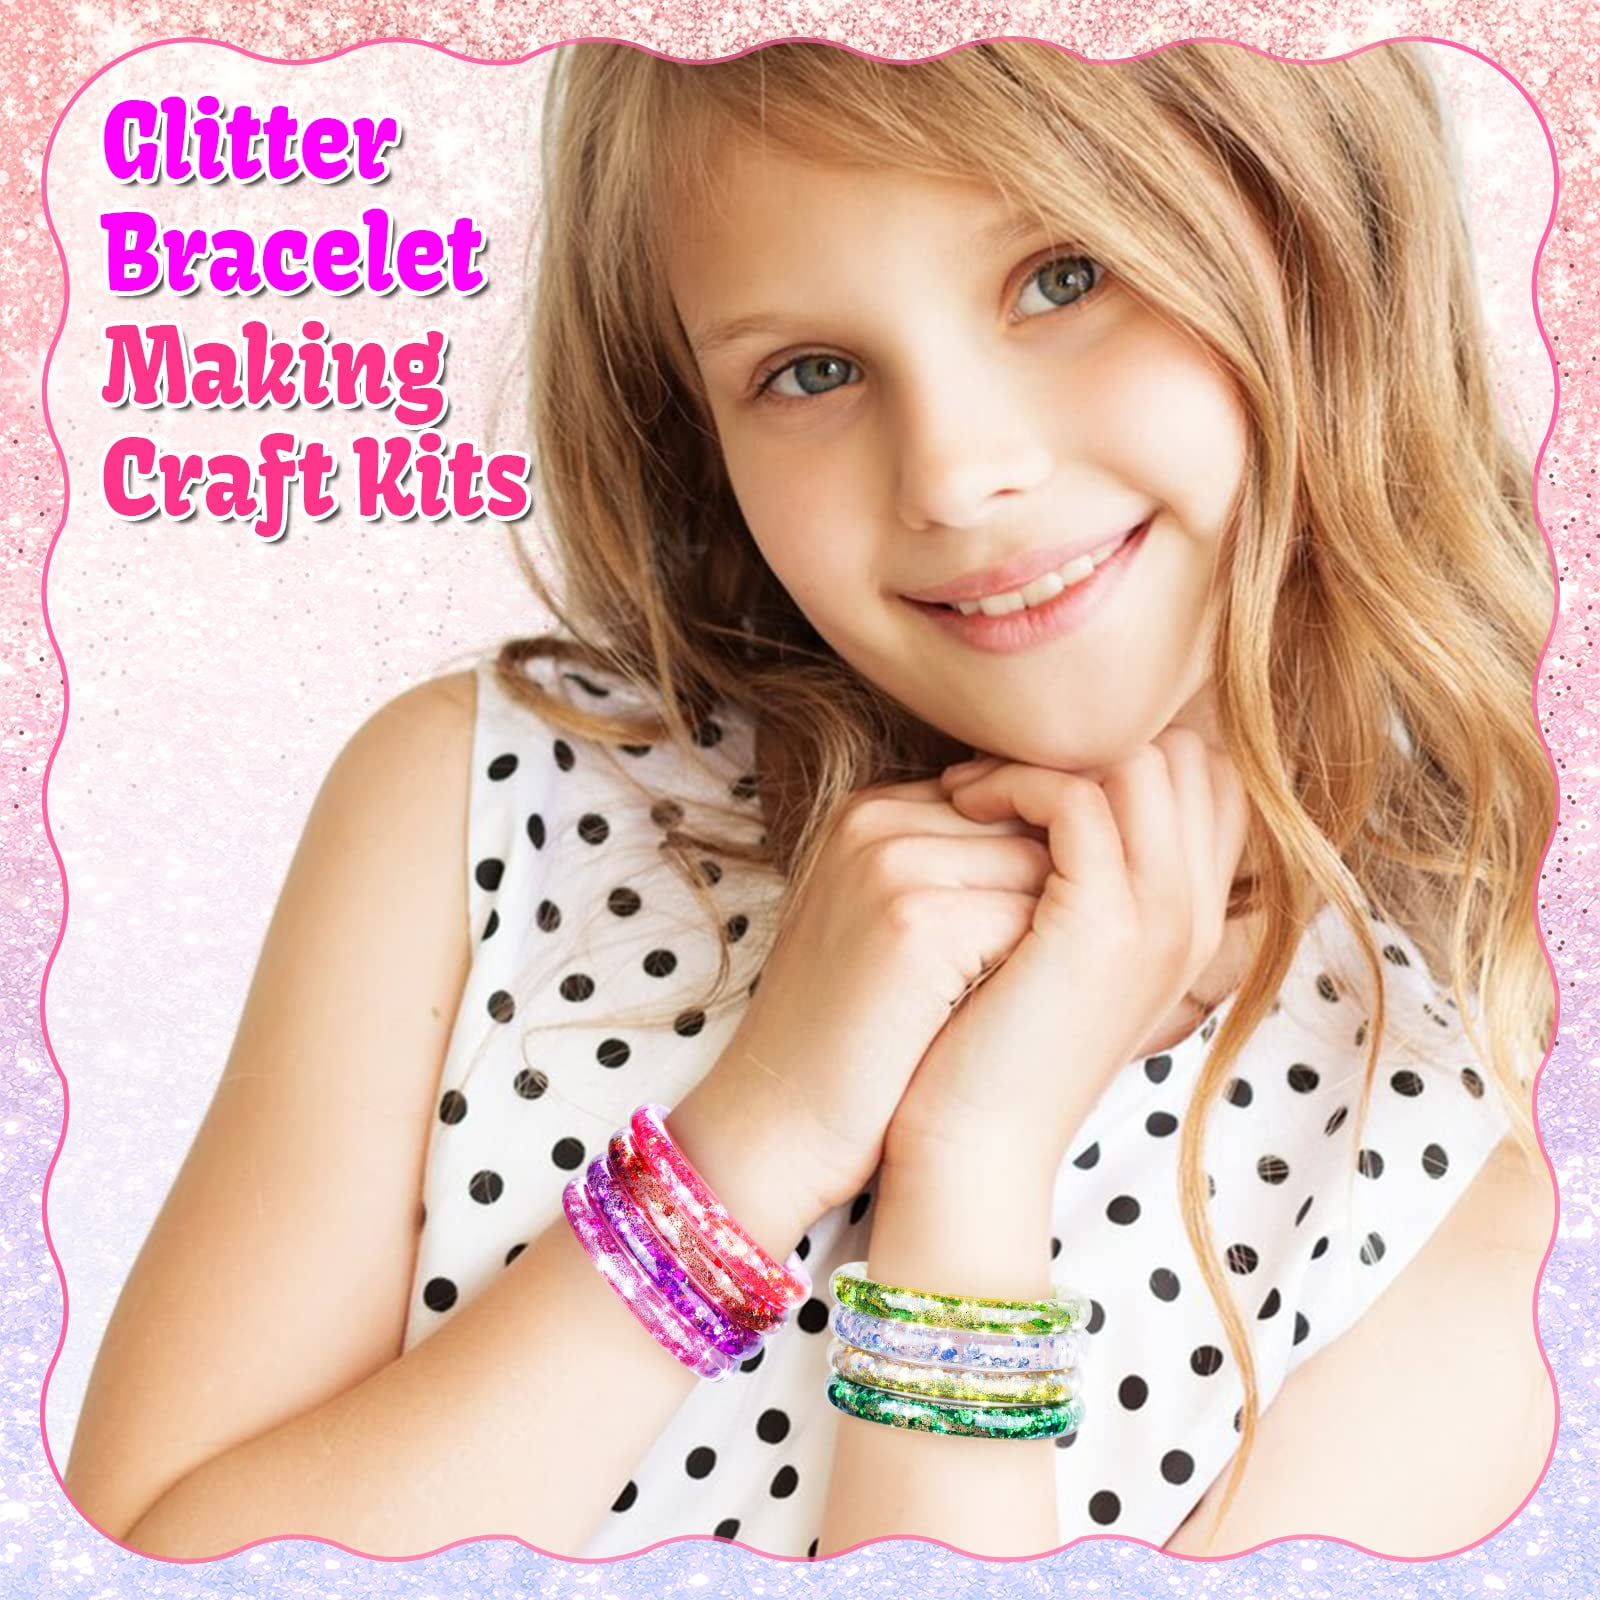 5 6 7 8 9 10 Year Old Girl Gifts, Art and Craft for Kids Age 6-8 Gifts for Girl Toys Age 6-12 Crafts for Girls Ages 7-10 Art Kit Toys for Girls